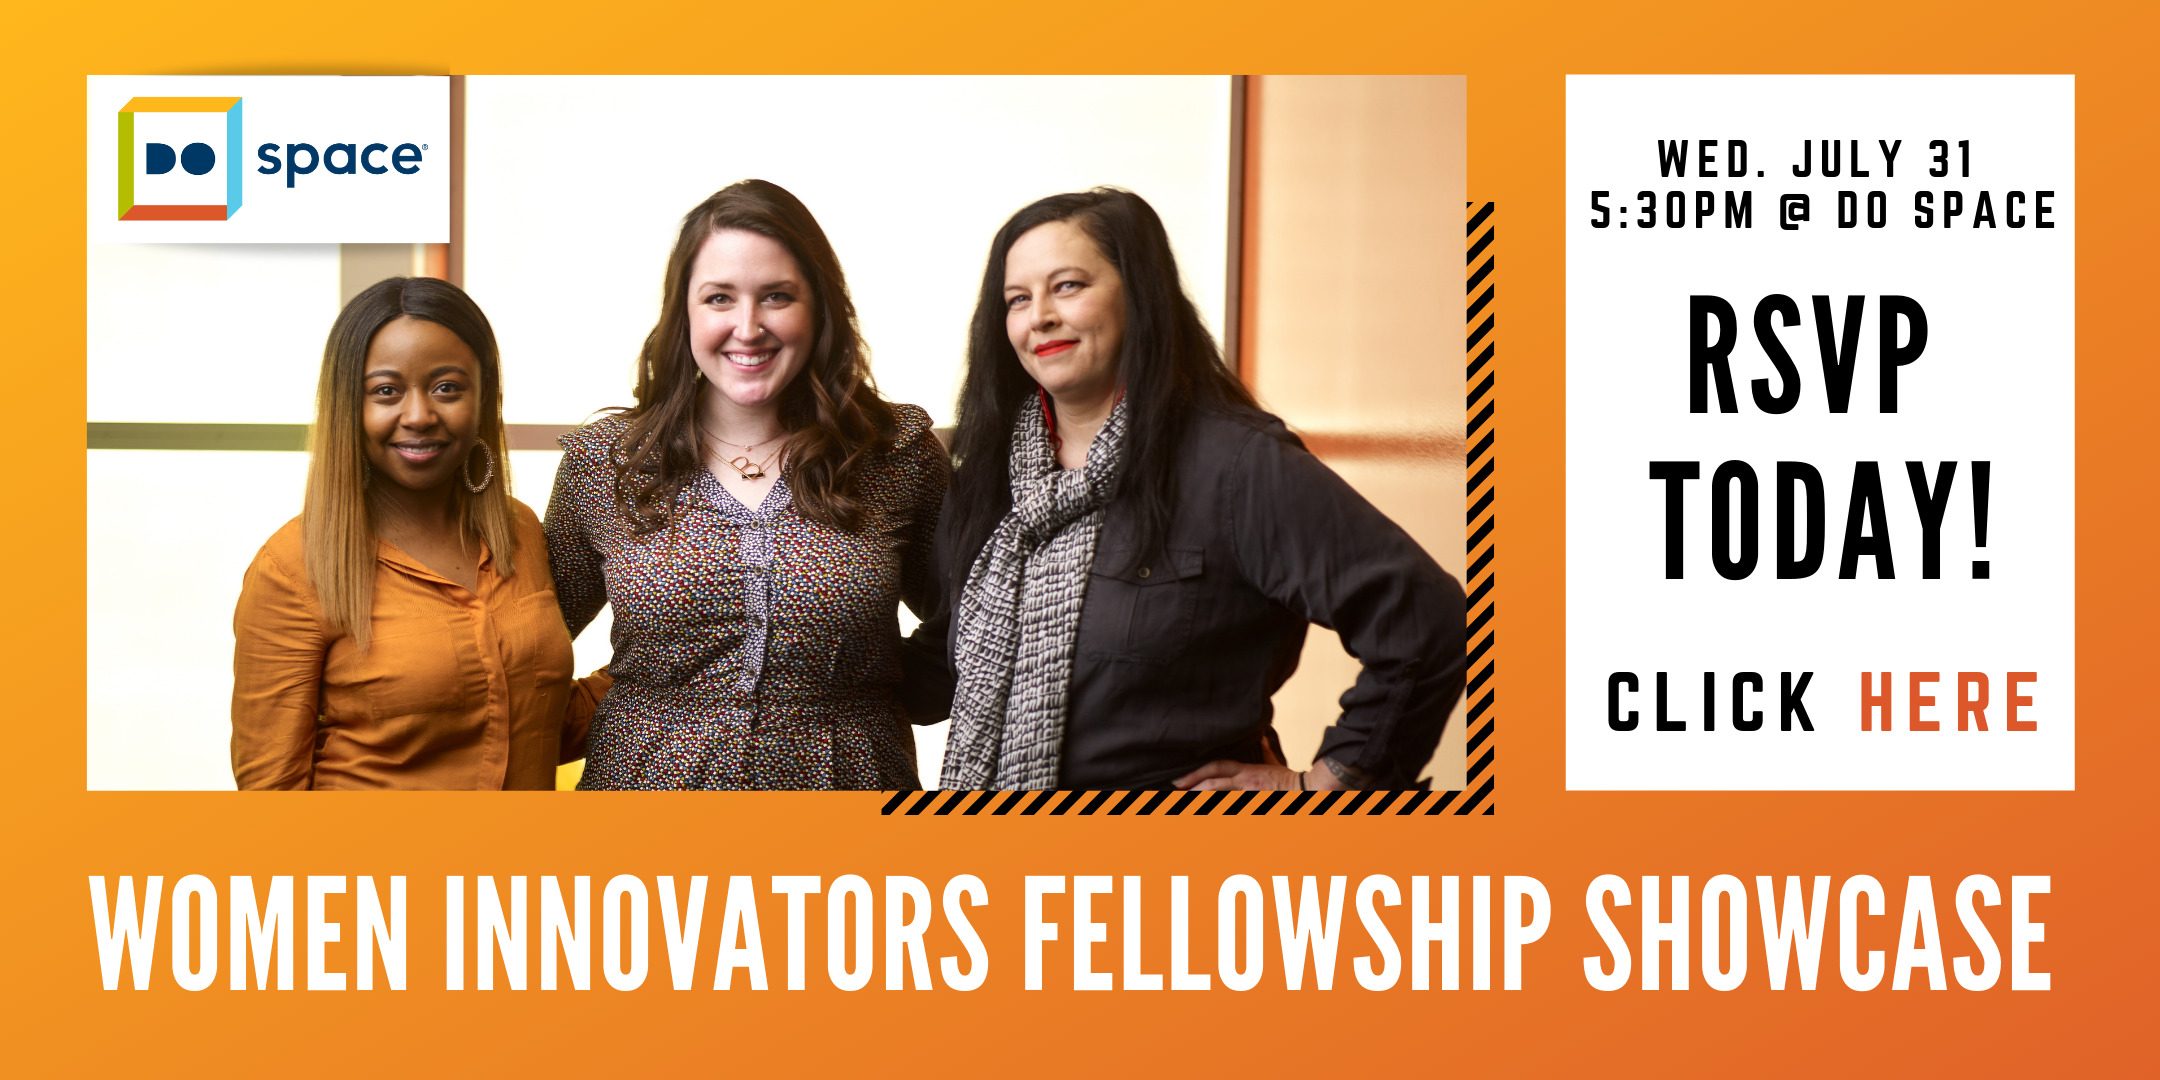 Women Innovators Fellowship Showcase. Wed. July 31st, 5:30 p.m., Do Space. RSVP Today! Click here.